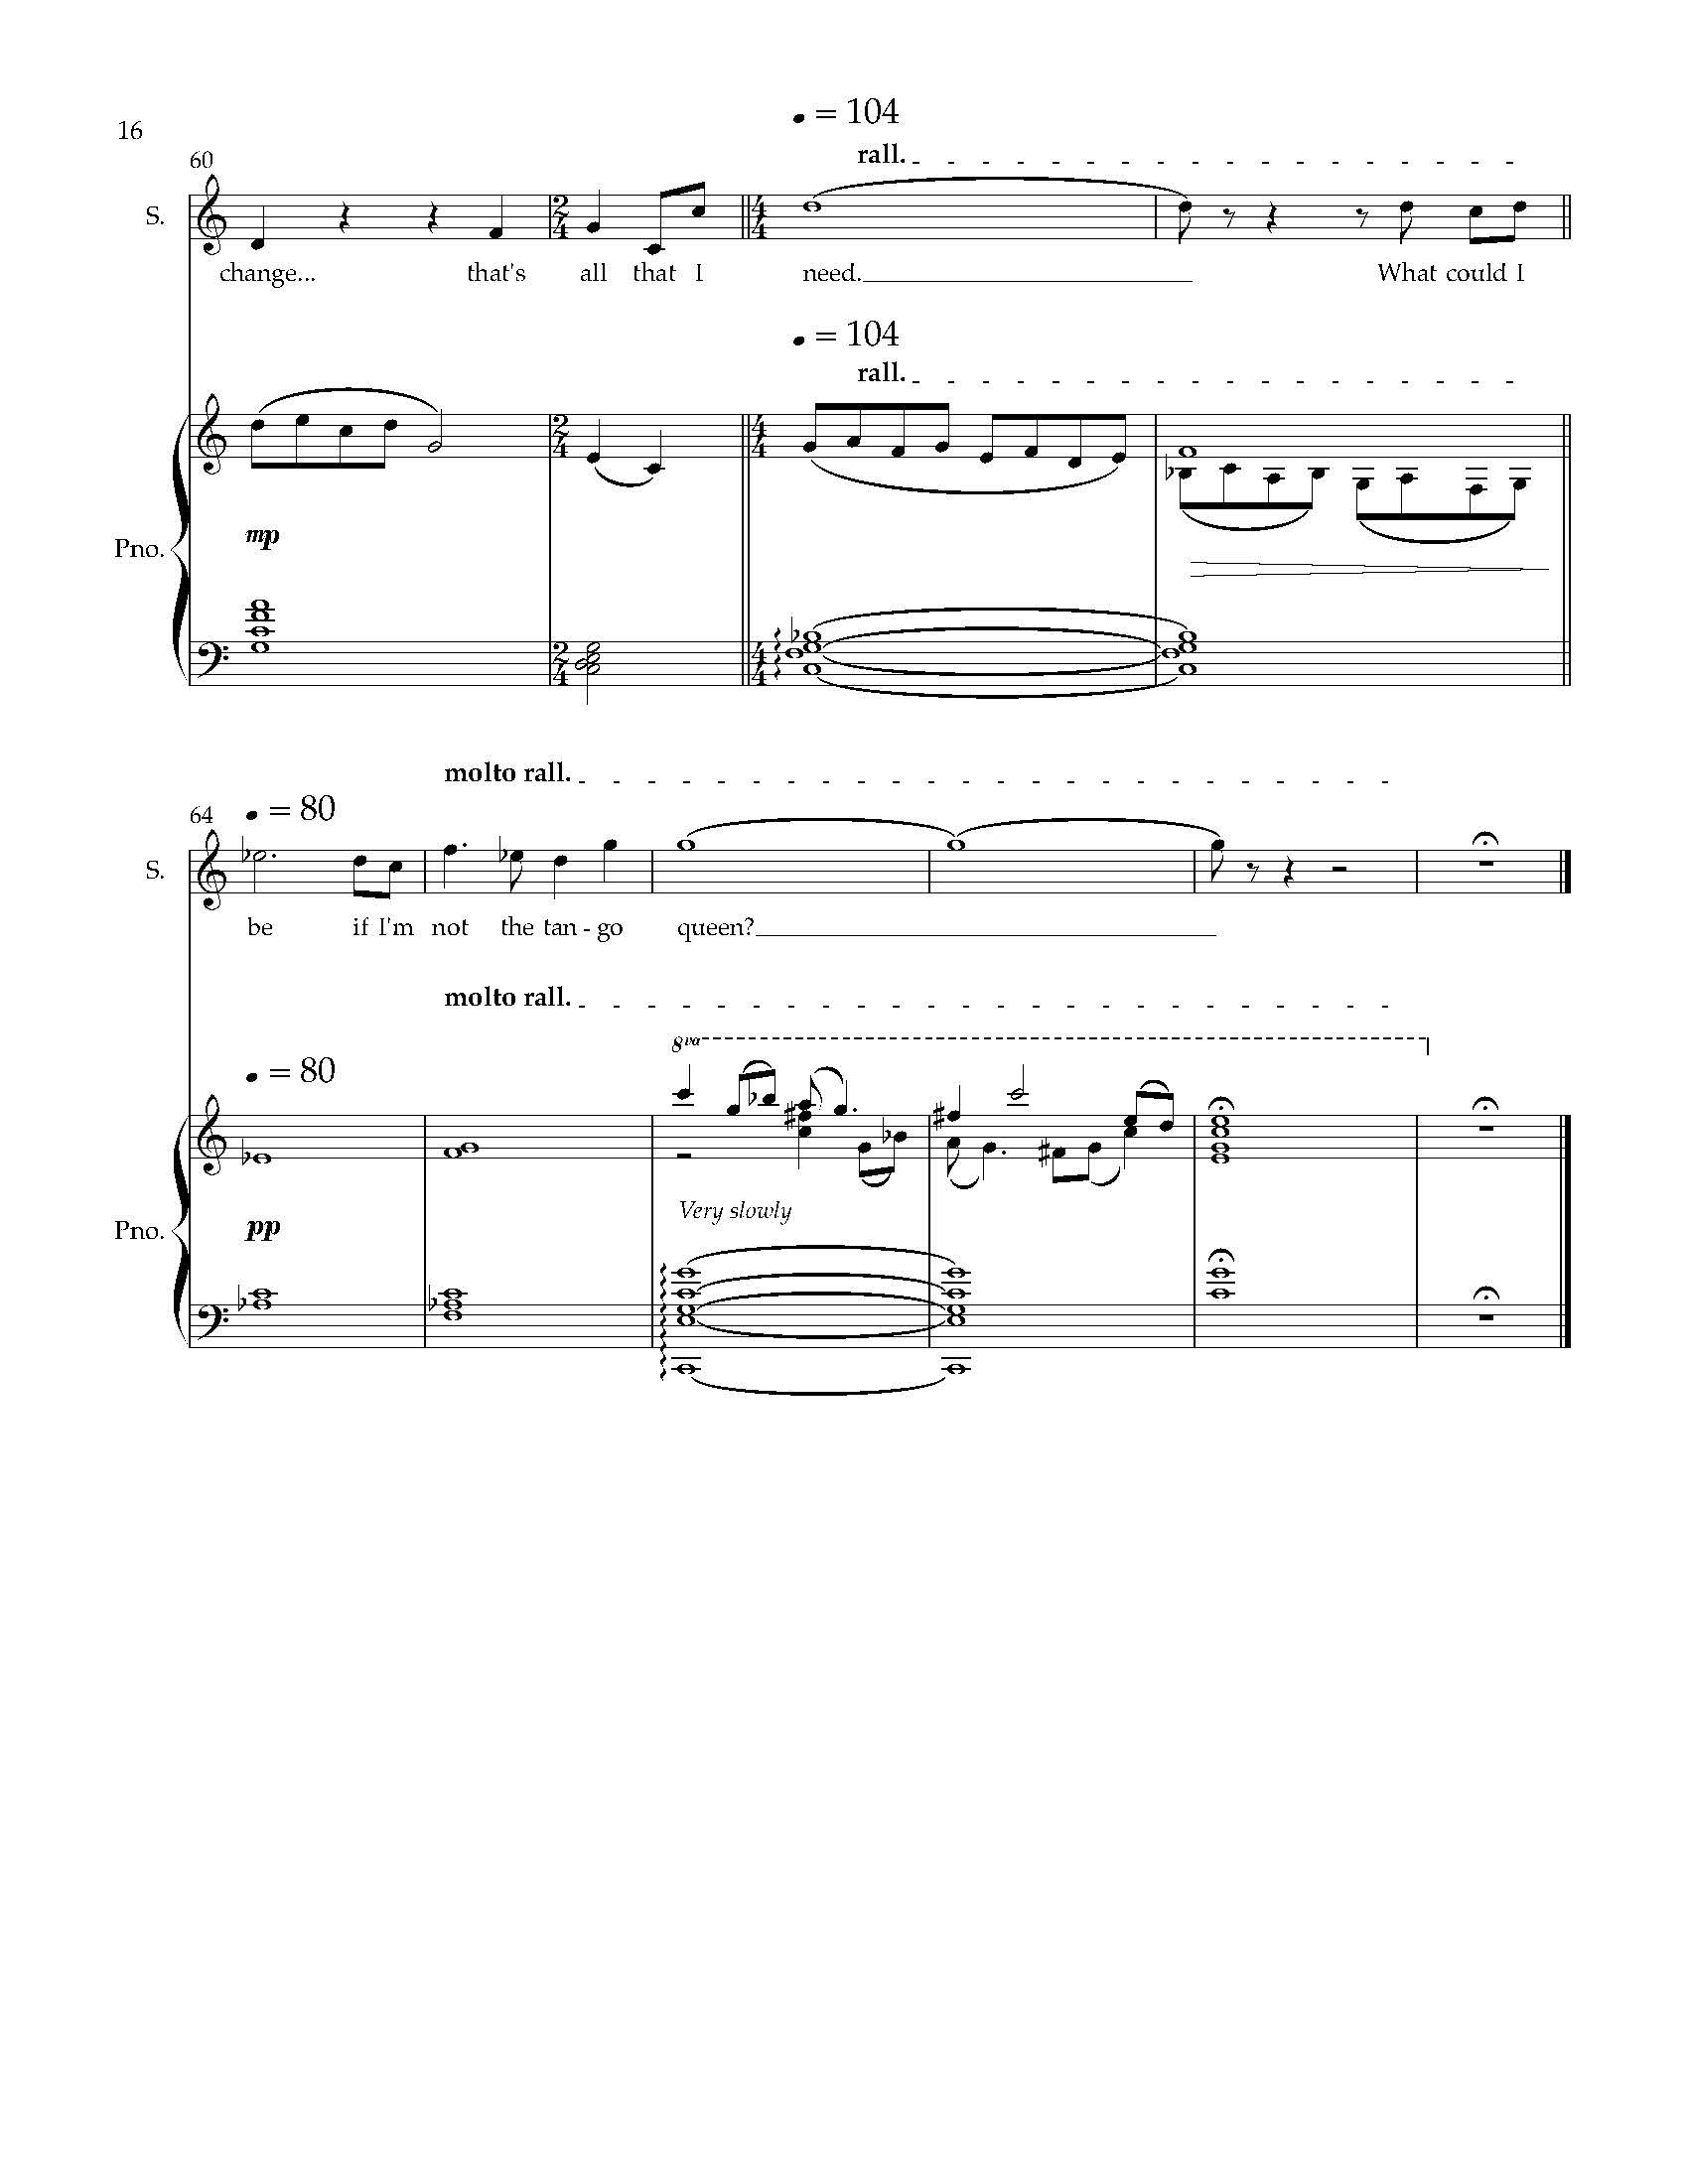 Five Arias from HWGS - Complete Score (1)_Page_20.jpg